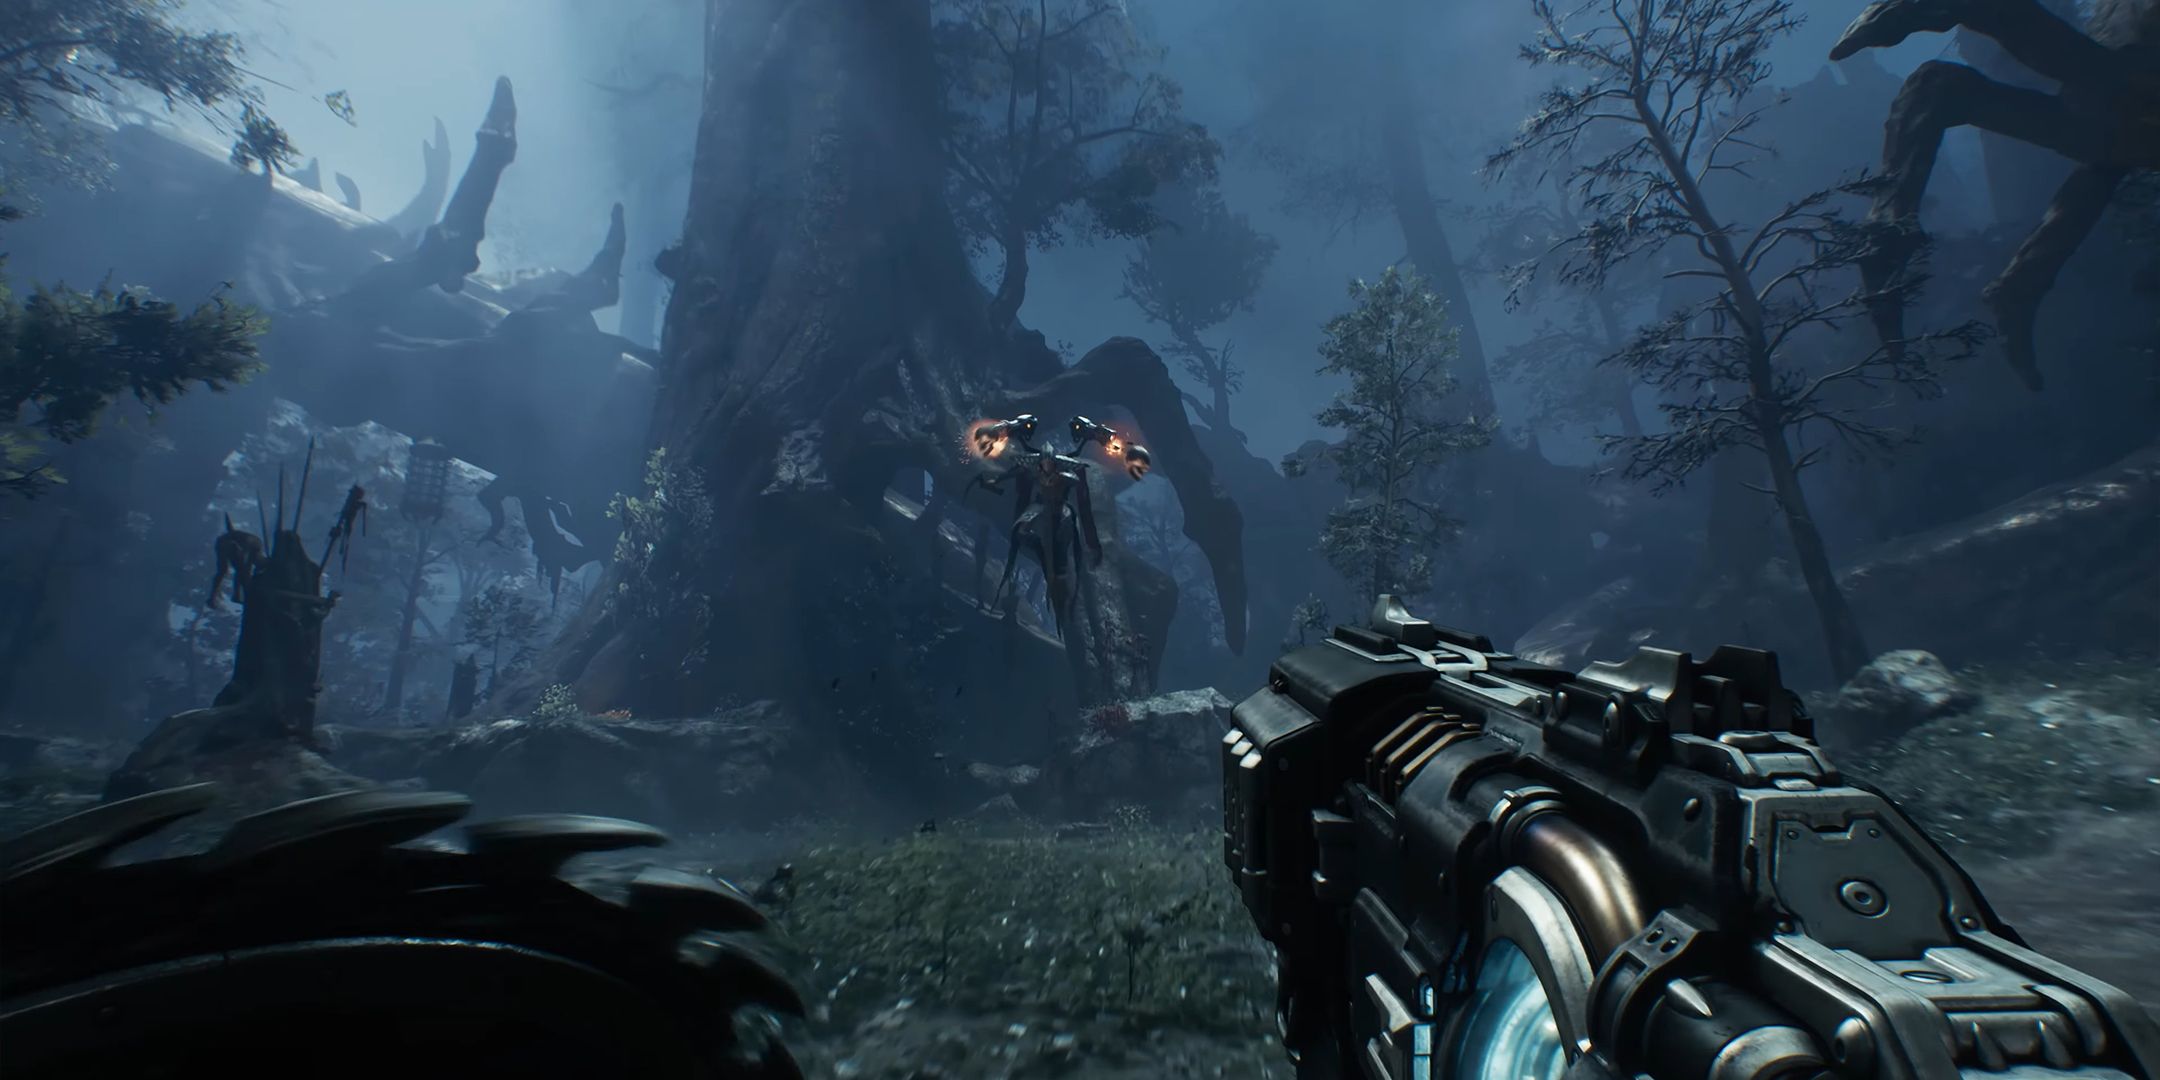 Doom The Dark Ages forest gameplay showing first-person content.